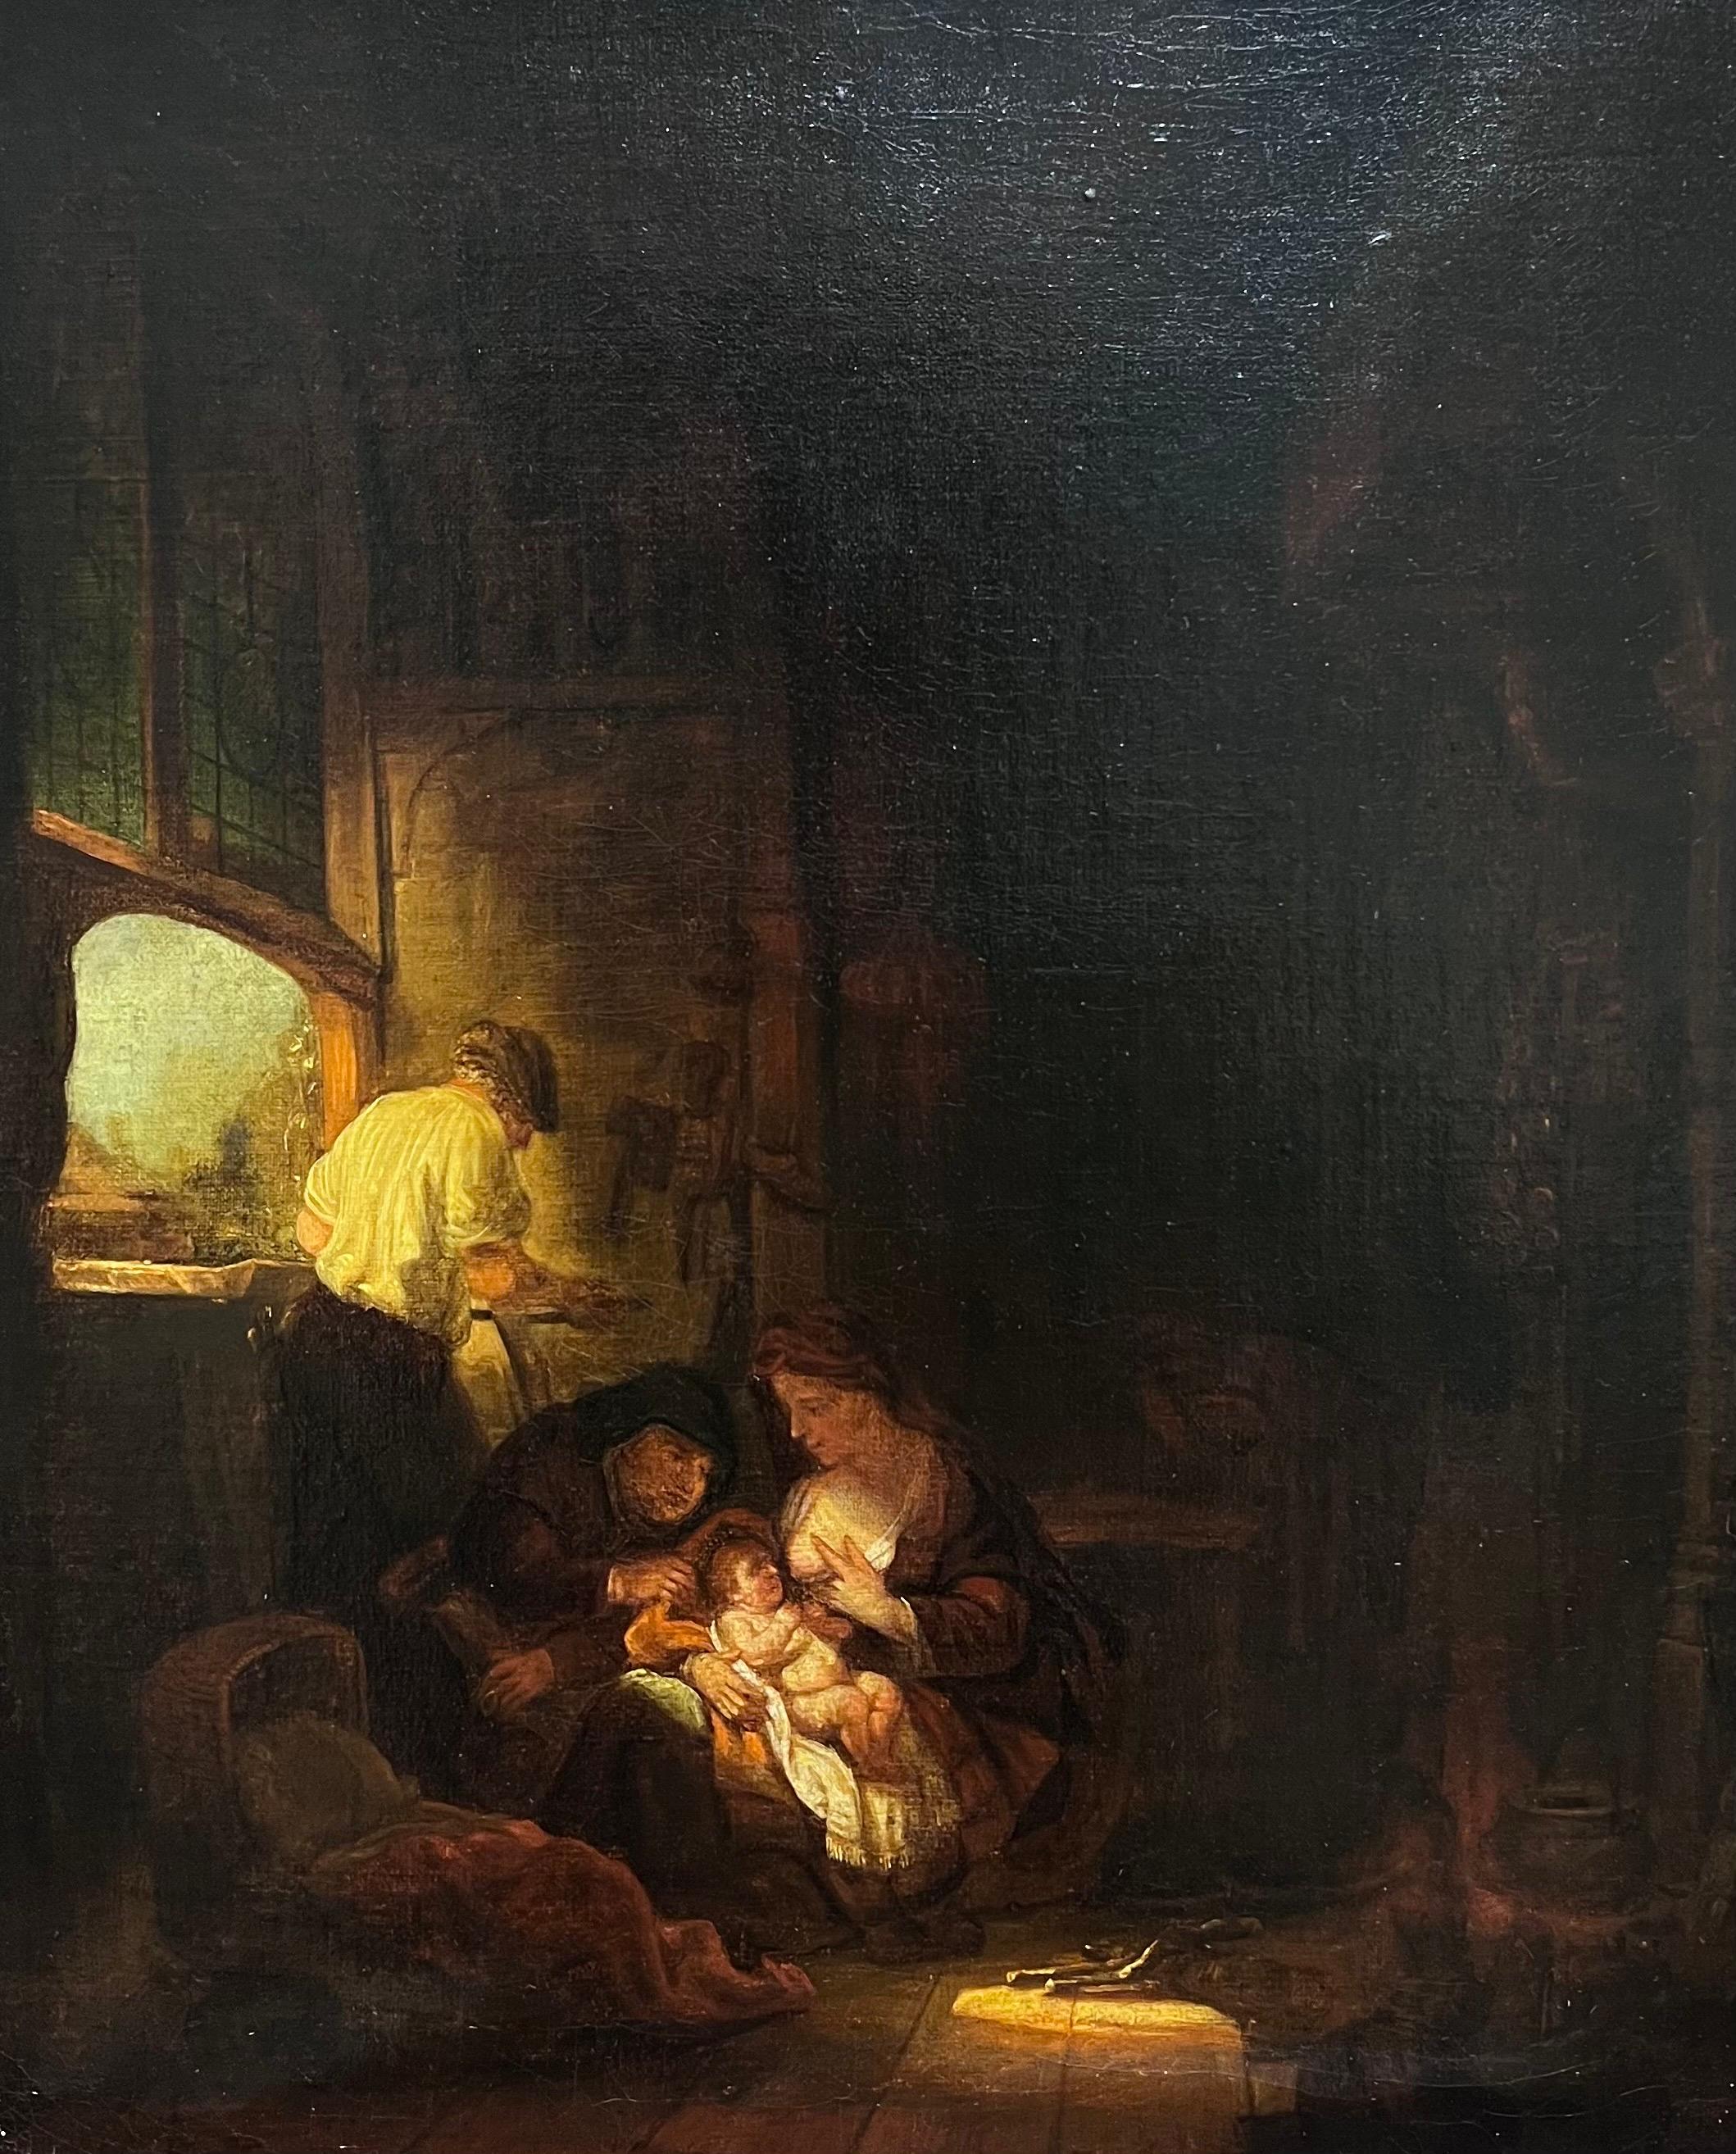 18th Dutch Old Master Interior Painting - Baby Born in Stable Interior Fine Dutch 18th Century Golden Age Oil Painting